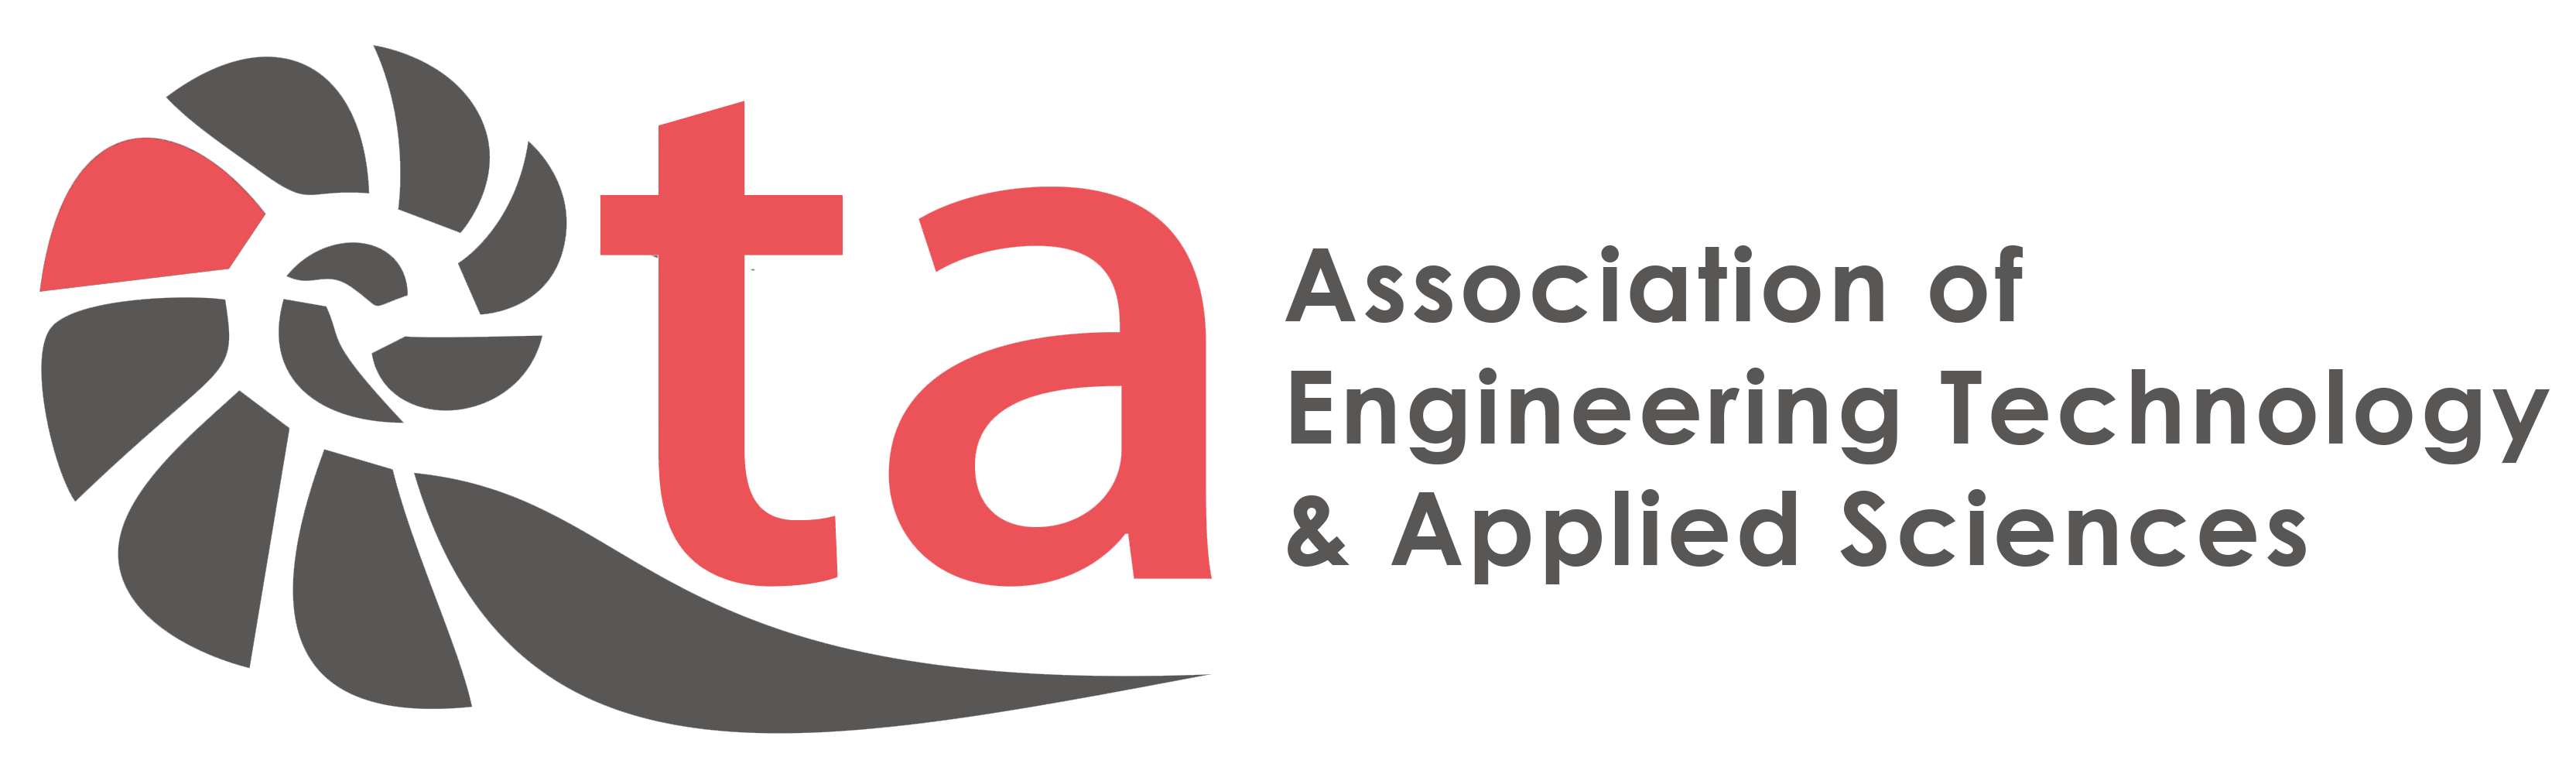 AETA International Conference on Research in Engineering, Information Technology, Business Design, Applied Sciences & Solar Technology ITAS